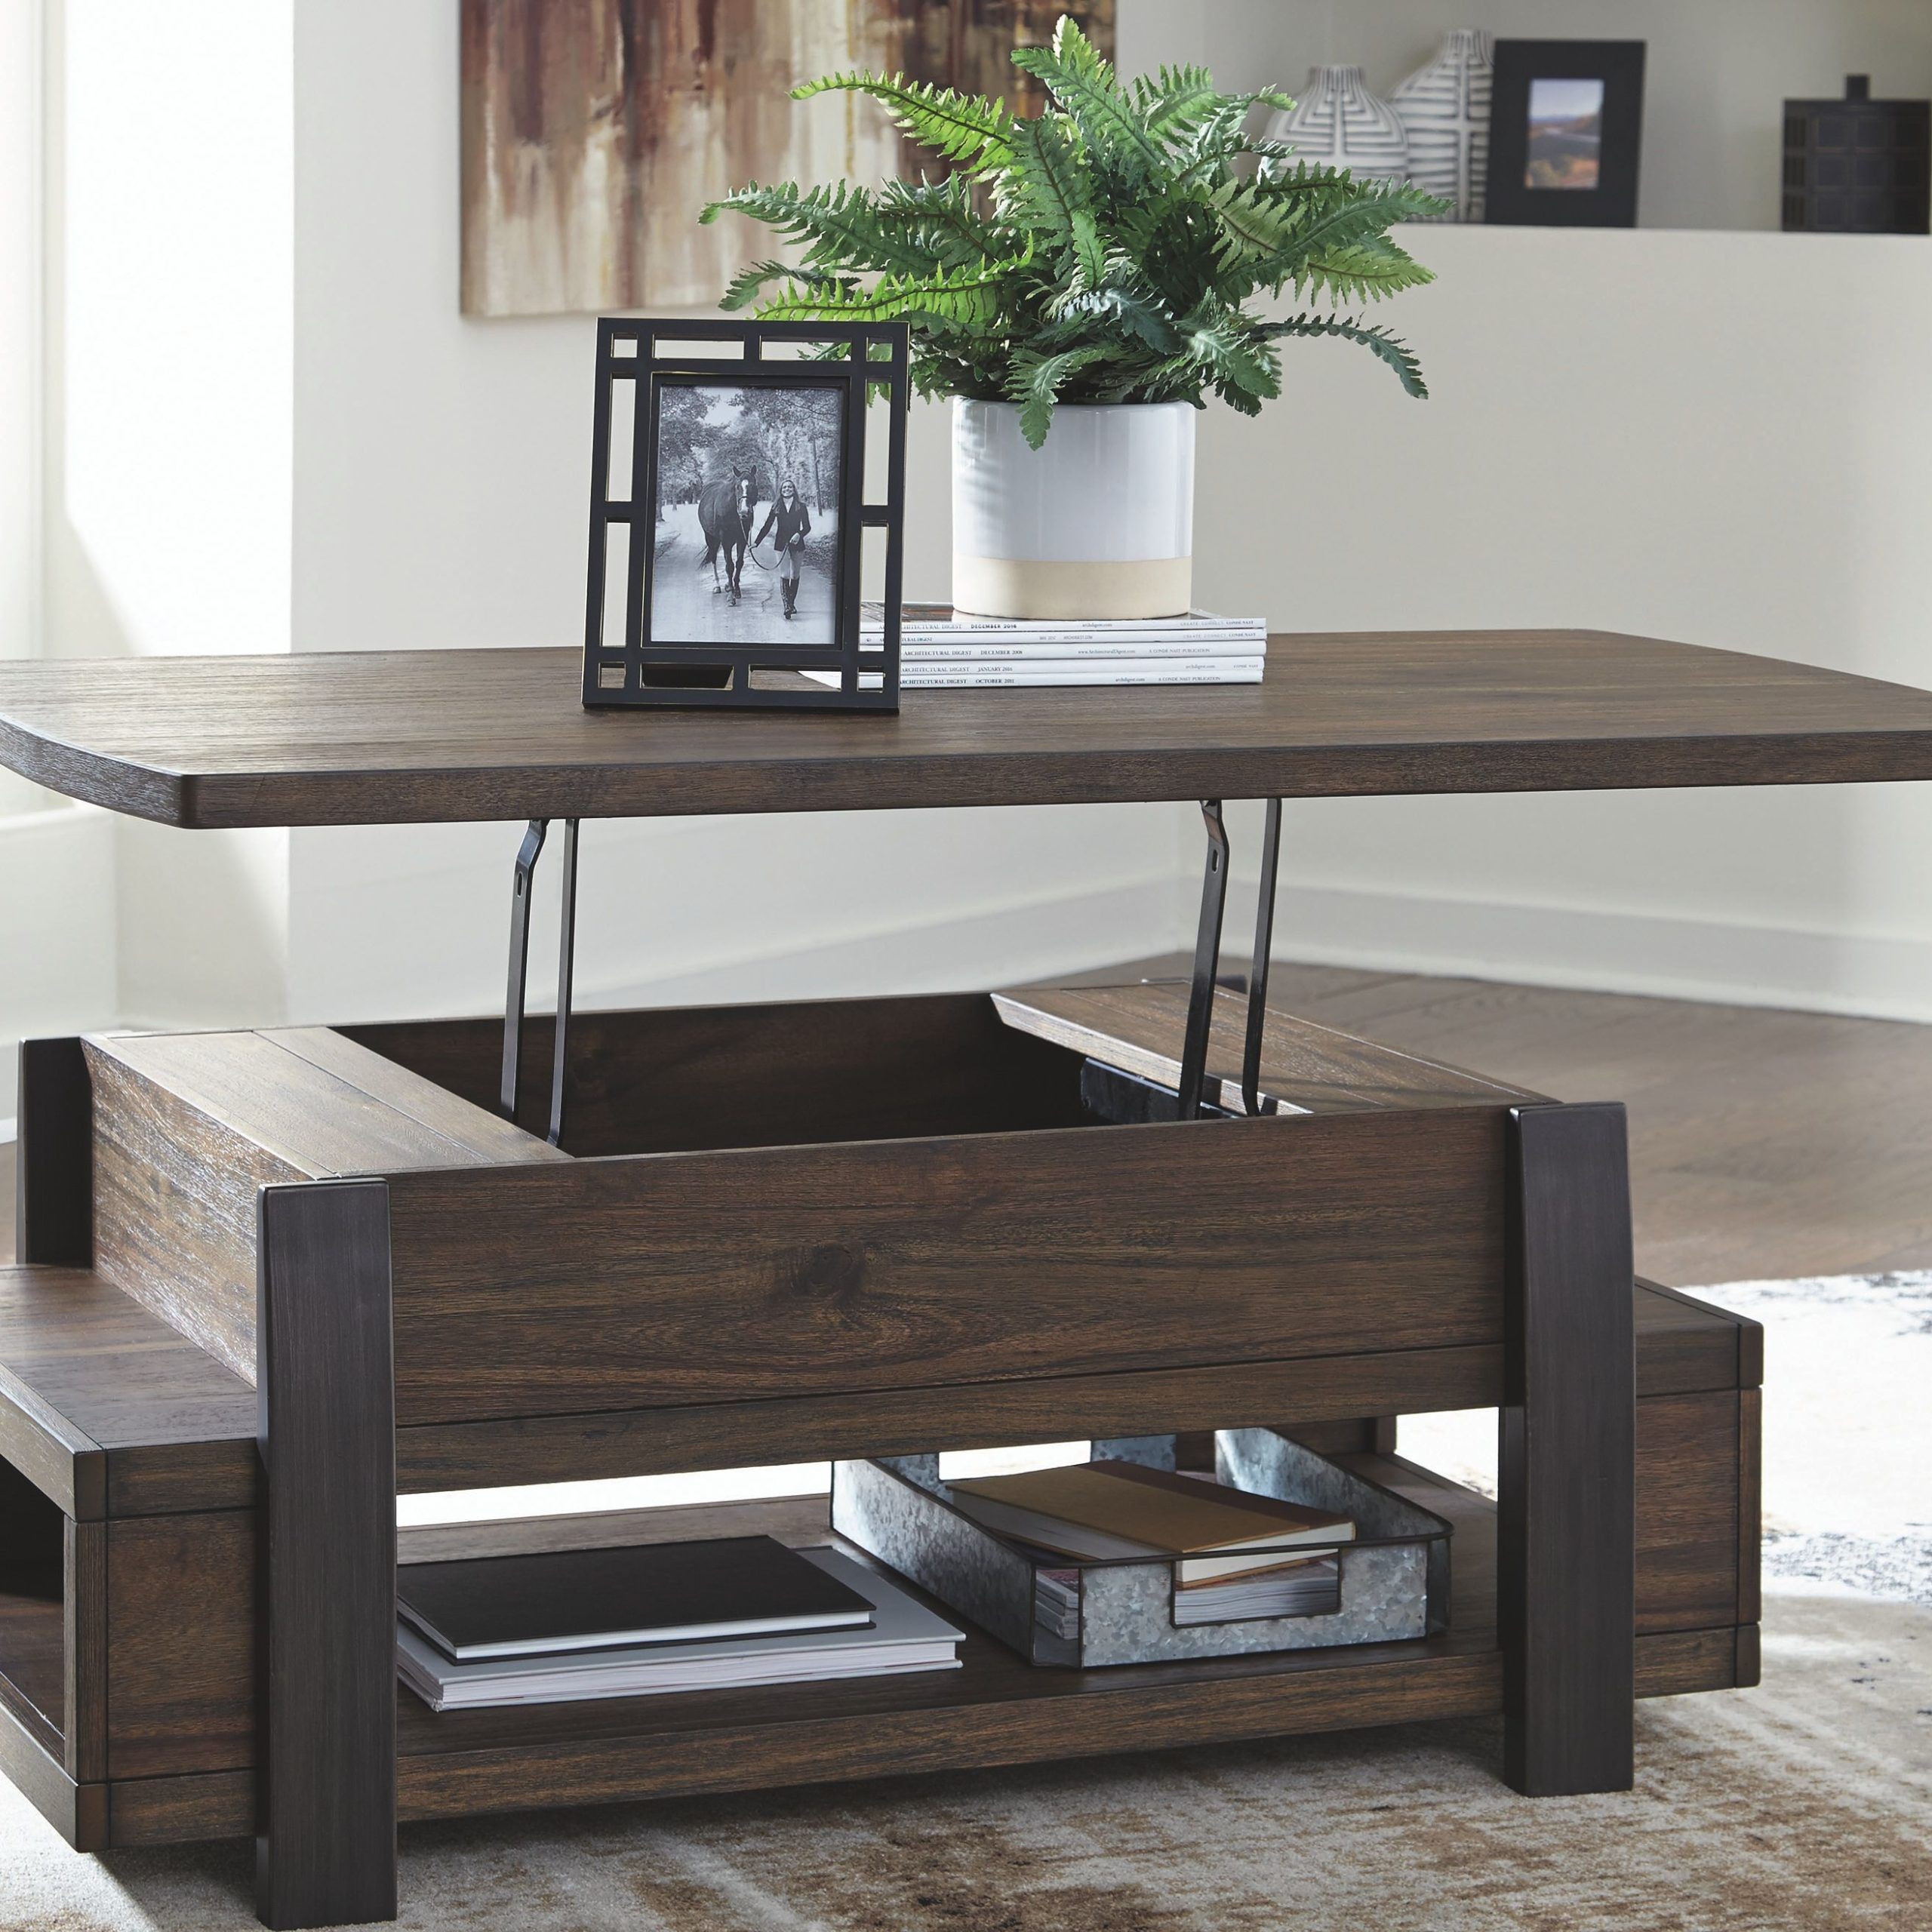 Vailbry Coffee Table With Lift Top, Brown | Lift Top Coffee Table Intended For Lift Top Coffee Tables With Shelves (View 12 of 20)